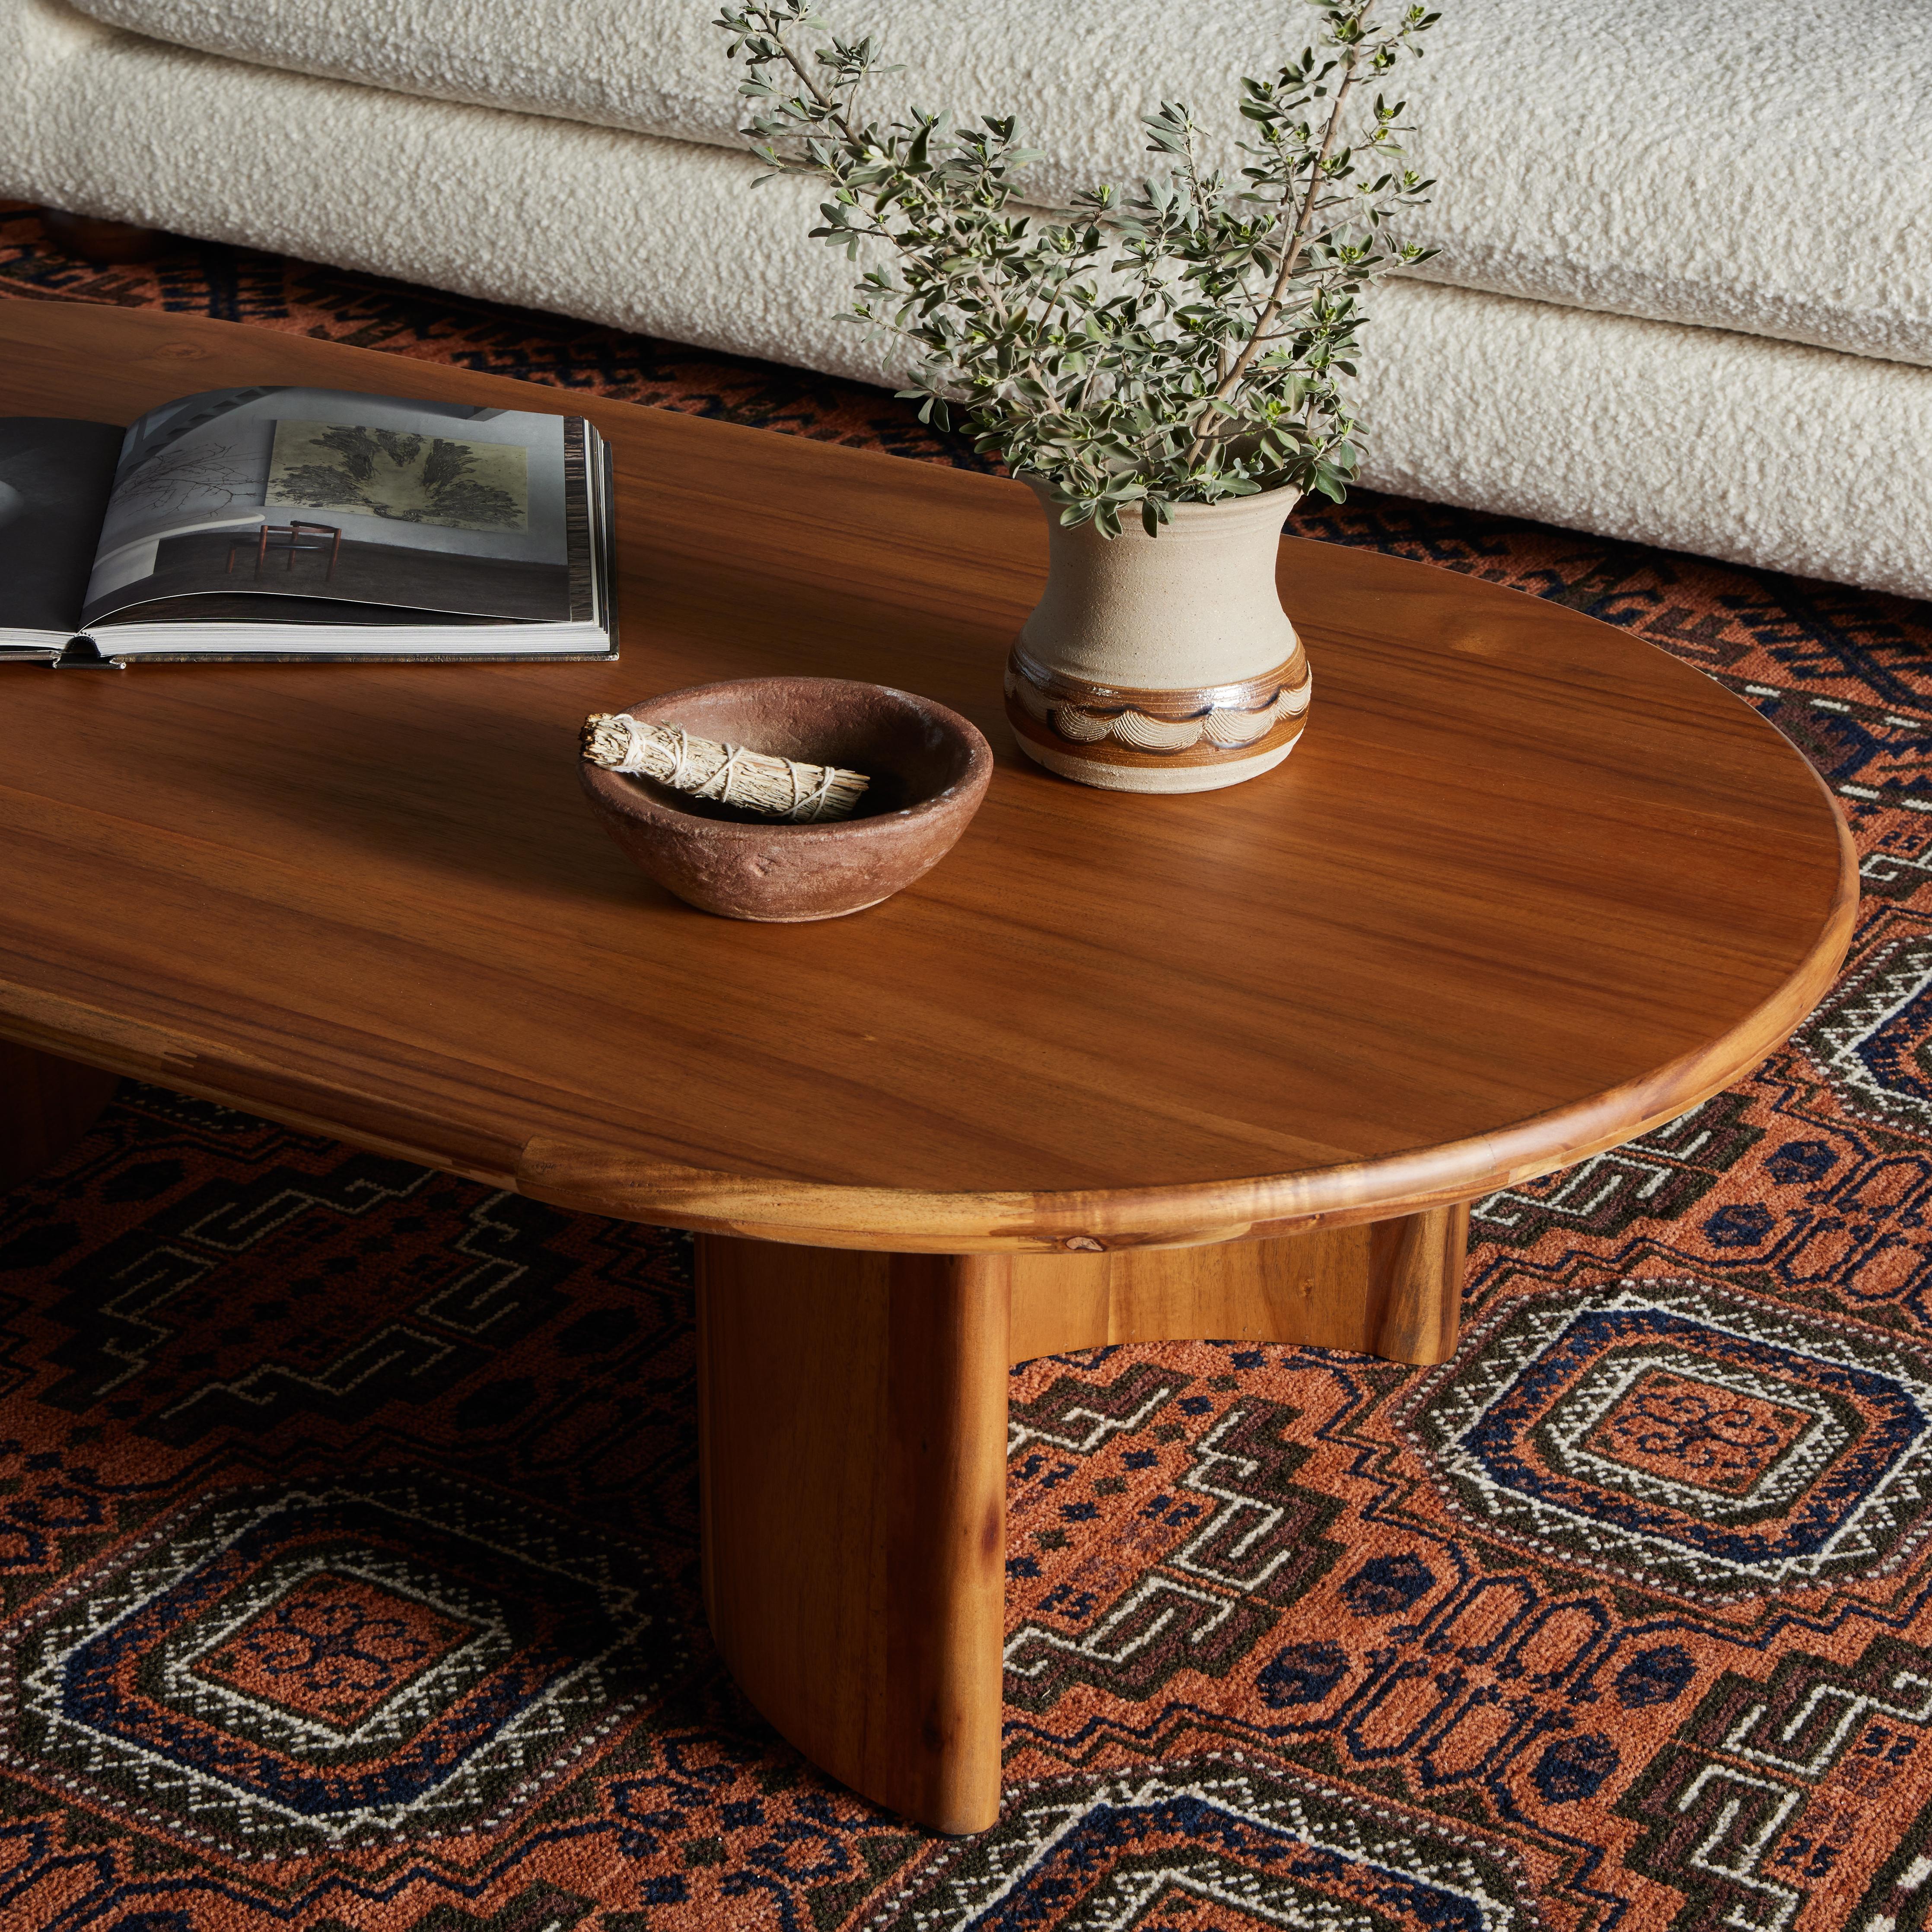 A study in shape. Solid brown acacia forms crescent-shaped legs and sprawling oval tabletop, bringing organic presence to the living room. Amethyst Home provides interior design, new home construction design consulting, vintage area rugs, and lighting in the Des Moines metro area.